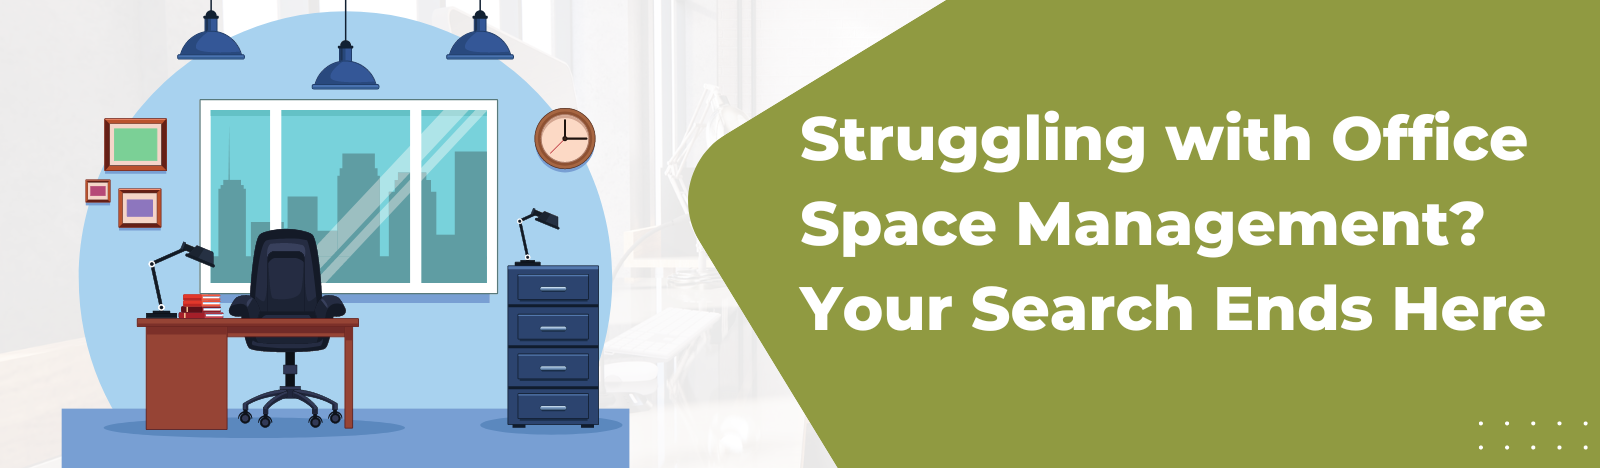 Struggling with Office Space Management? Your Search Ends Here